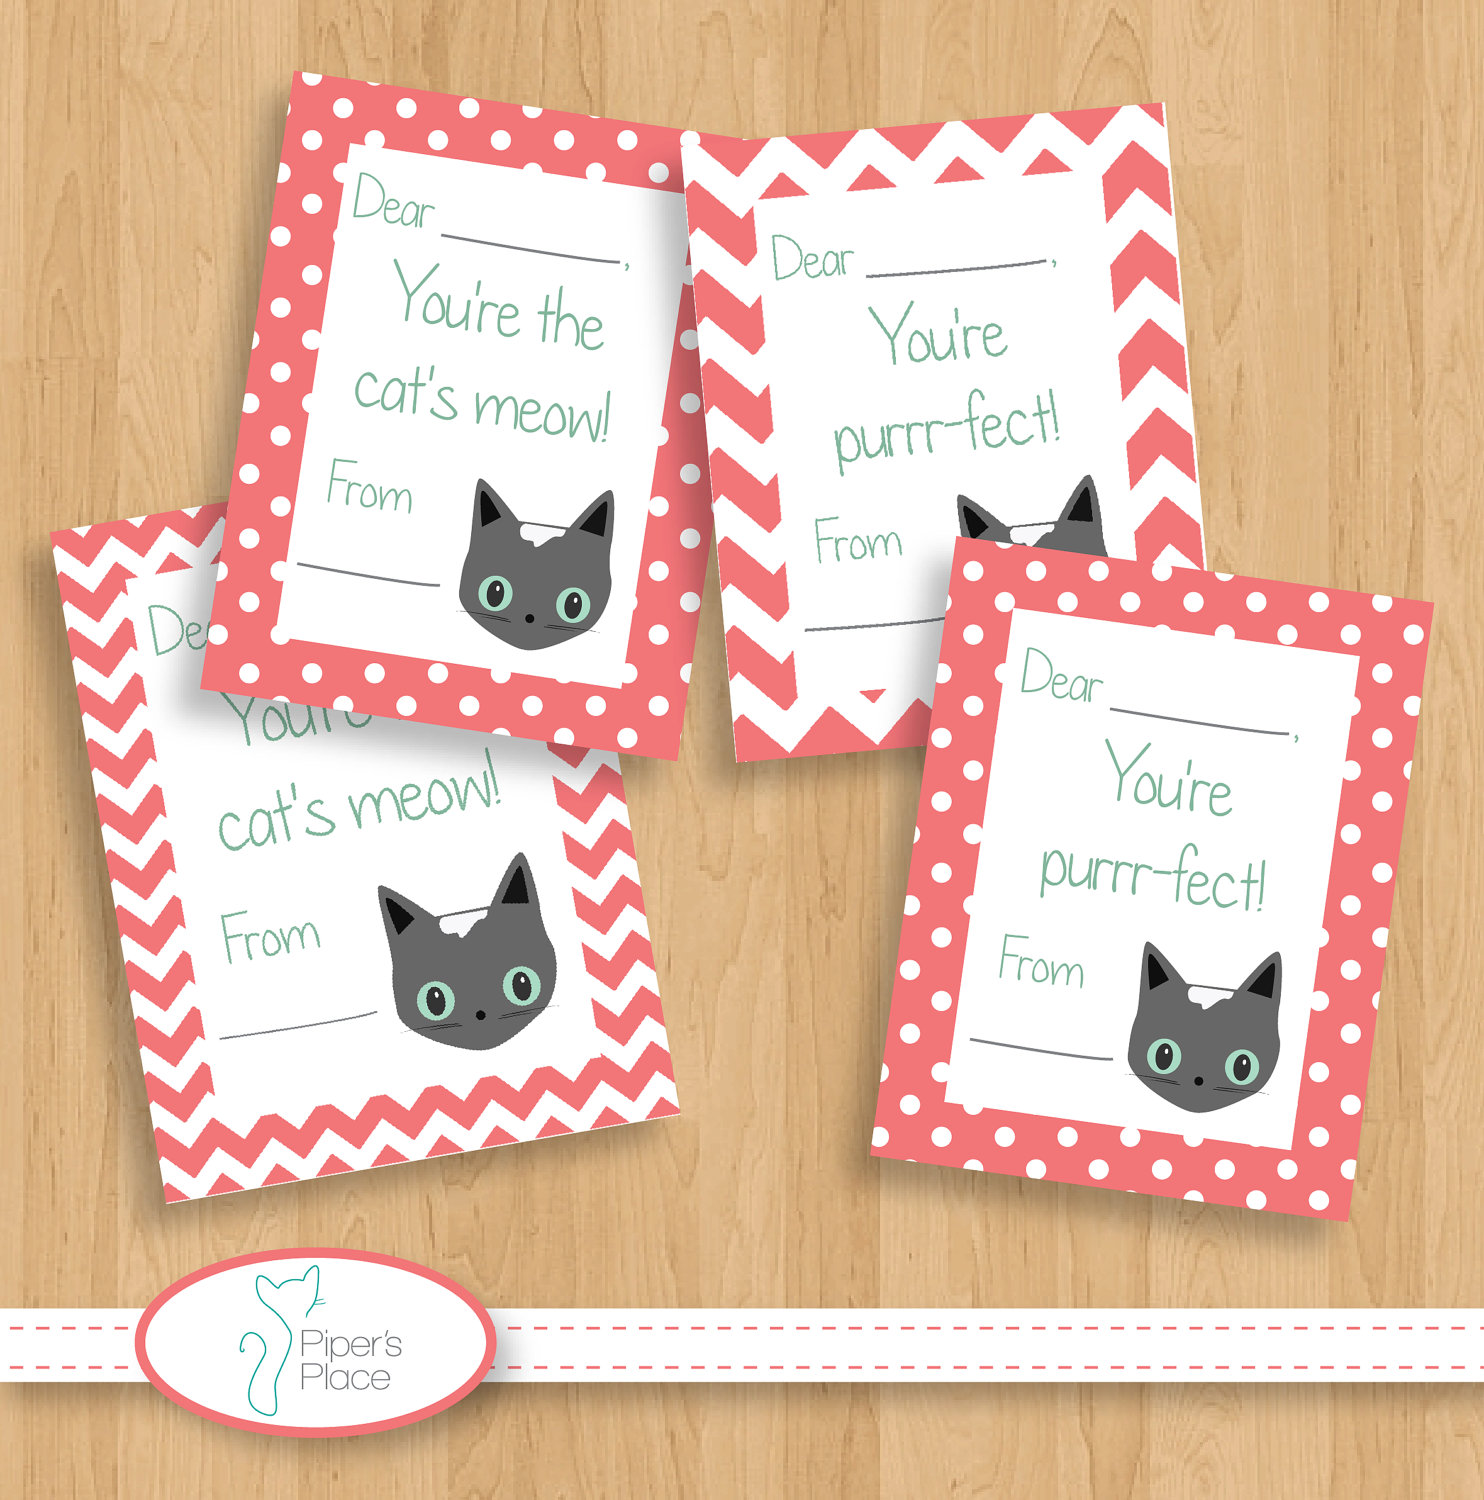 5 Best Images of Free Printable Valentine Cards Cat Valentine's Day